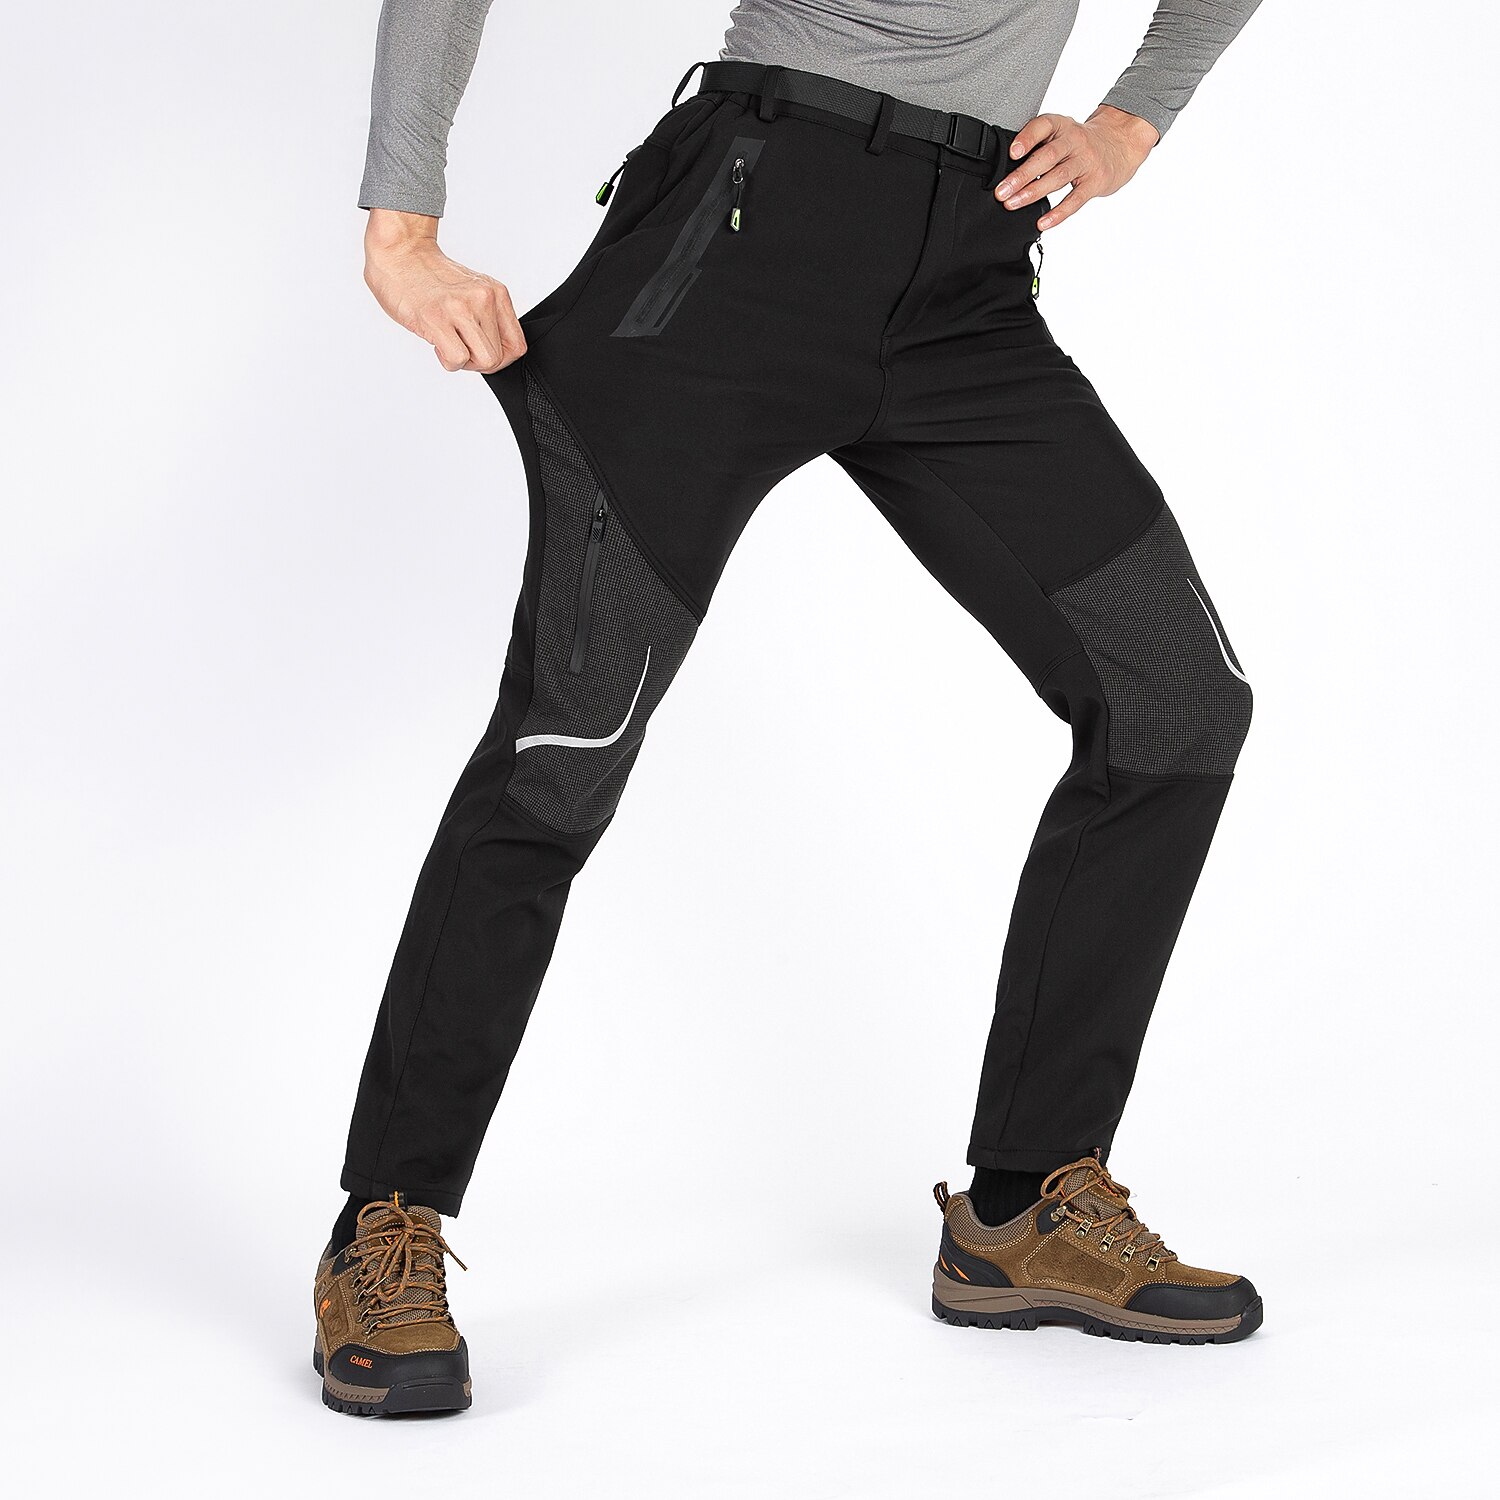 MENS TROUSERS WITH THERMAL LINING COMBAT STYLE ELASTICATED WAIST WITH DRAW CORD M L XL XXL XXXL 